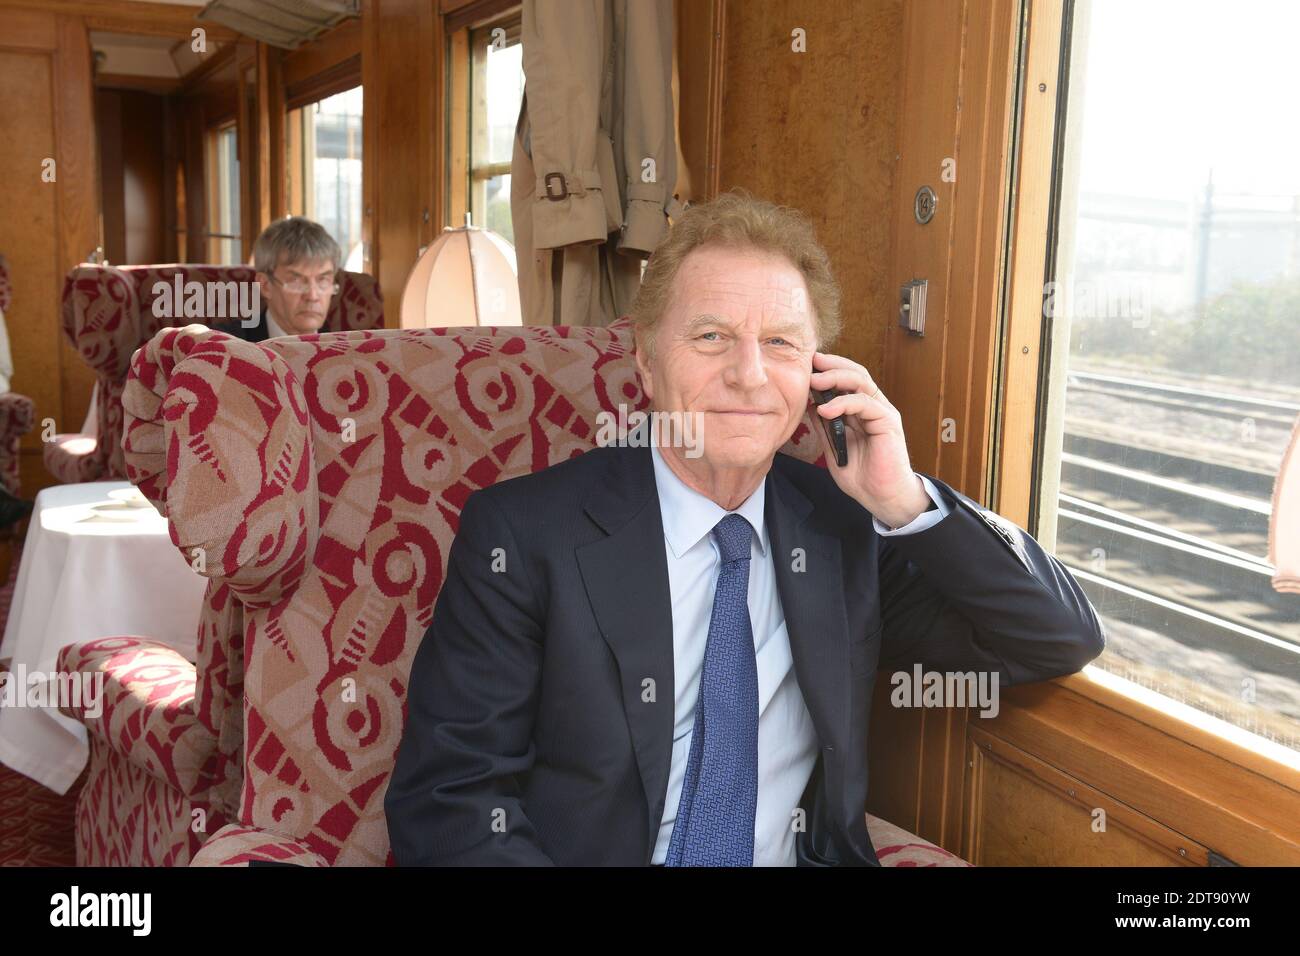 Robert Namias seen on board the 'Orient Express' train, for the presentation of the exhibition 'Once Upon A Time The Orient Express' ('Il Etait Une Fois l'Orient Express') in Paris, France on March 13, 2014. The exhibit will be held at the Institut du Monde Arabe from April 3rd to the end of August. Photo by Ammar Abd Rabbo/ABACAPRESS.COM Stock Photo